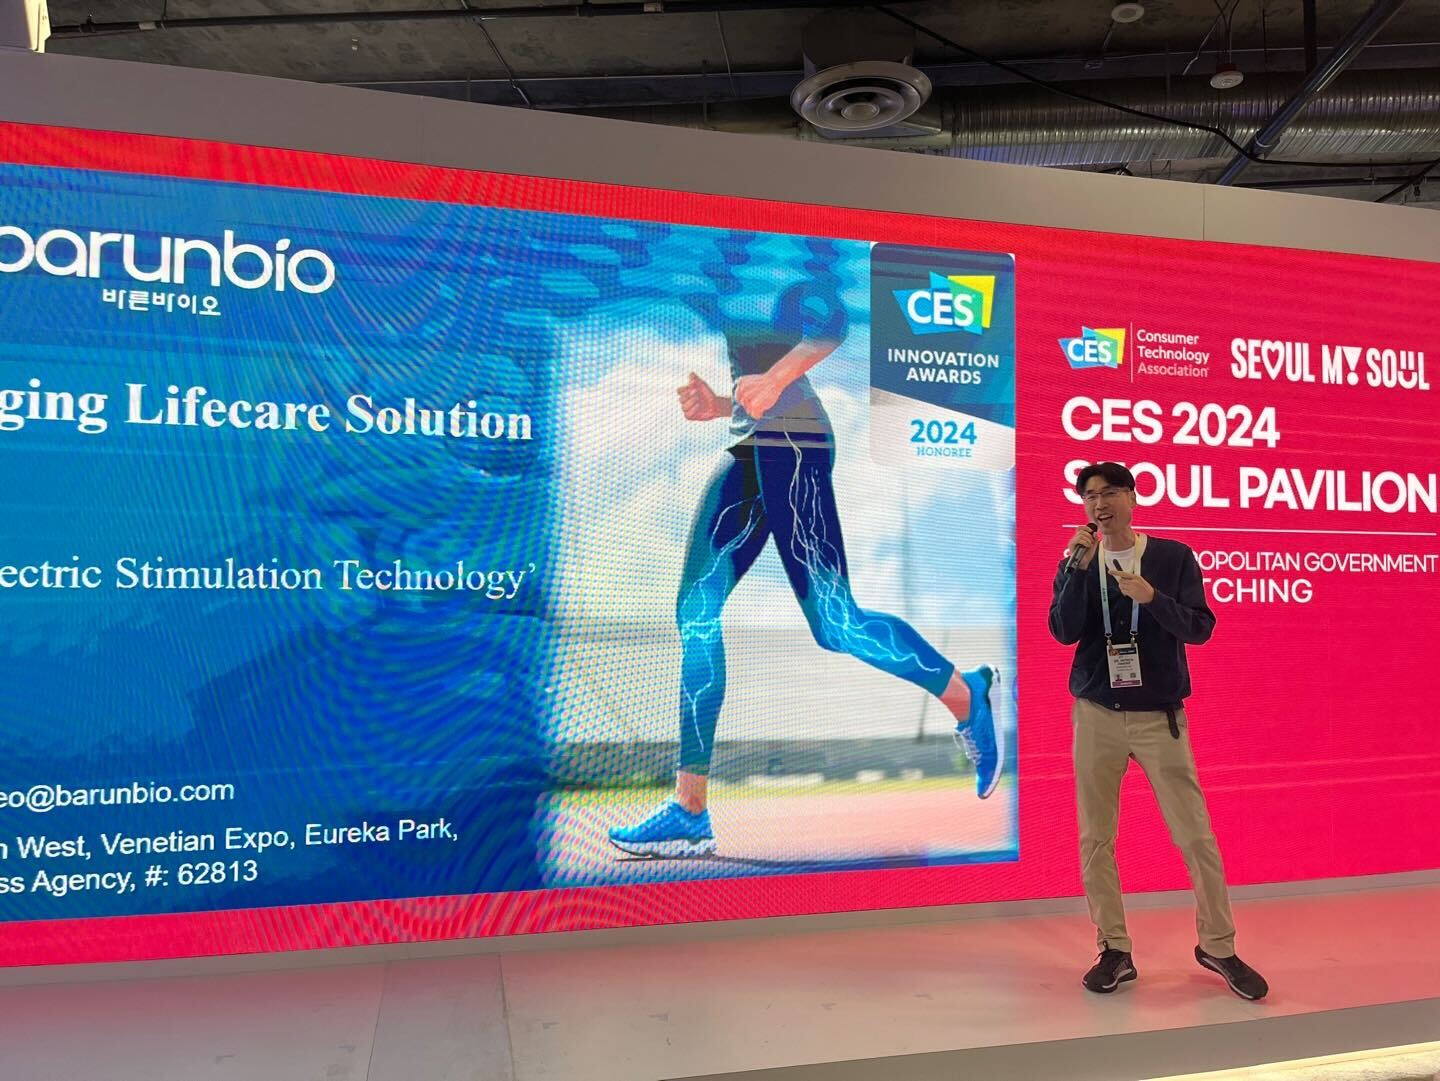 CES 2024 Barunbio: Pitch in 5 Minutes